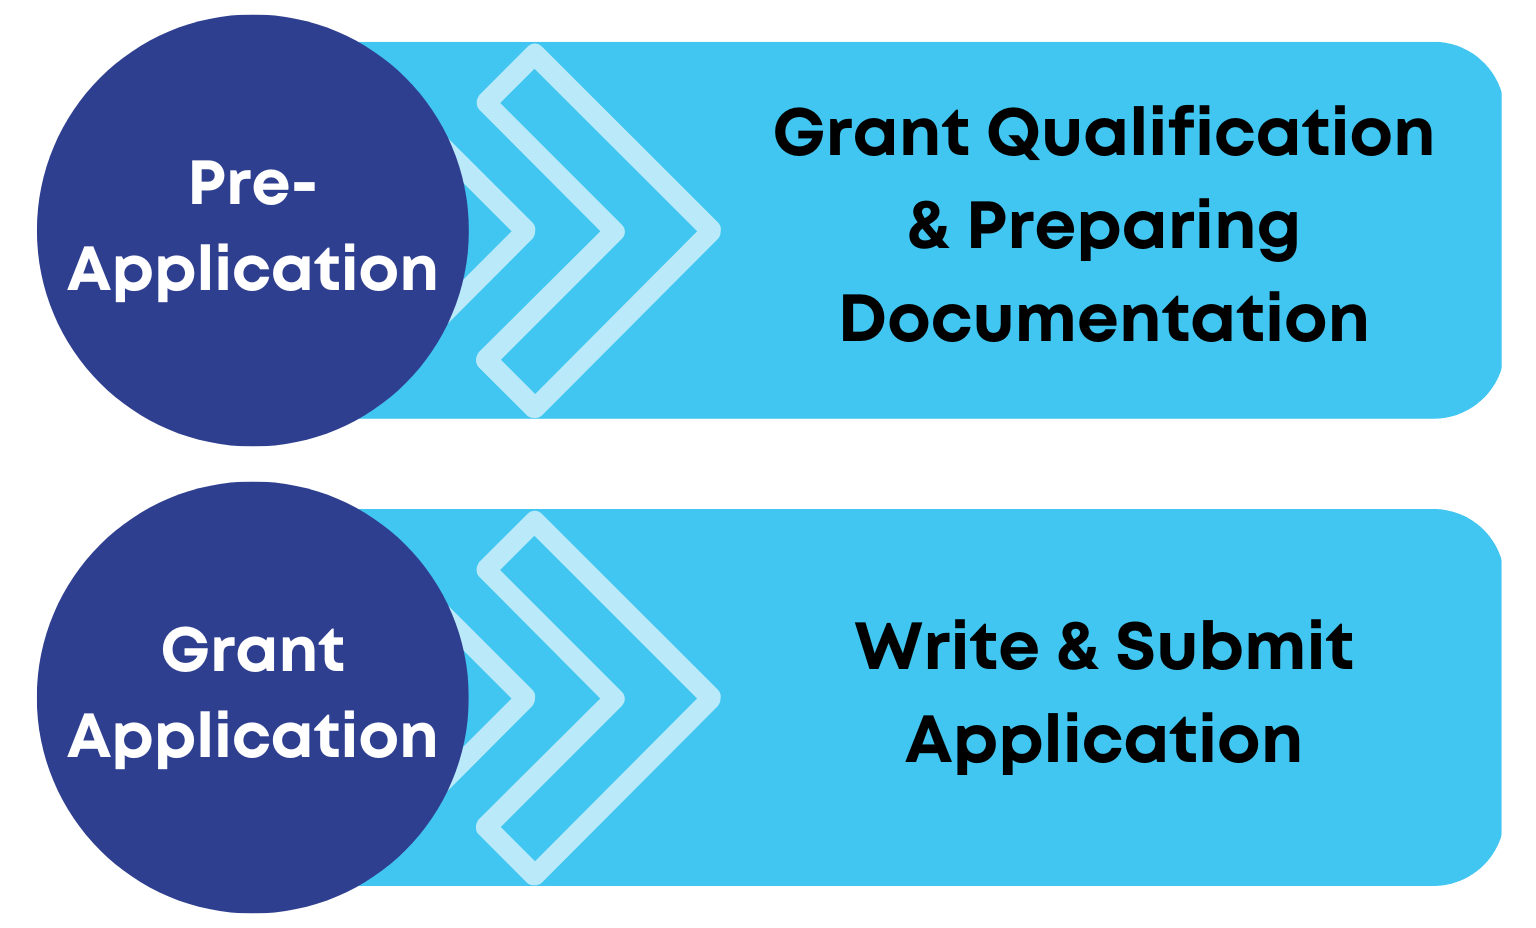 Widelity Services: Grant qualification, preparing documentation, grant application